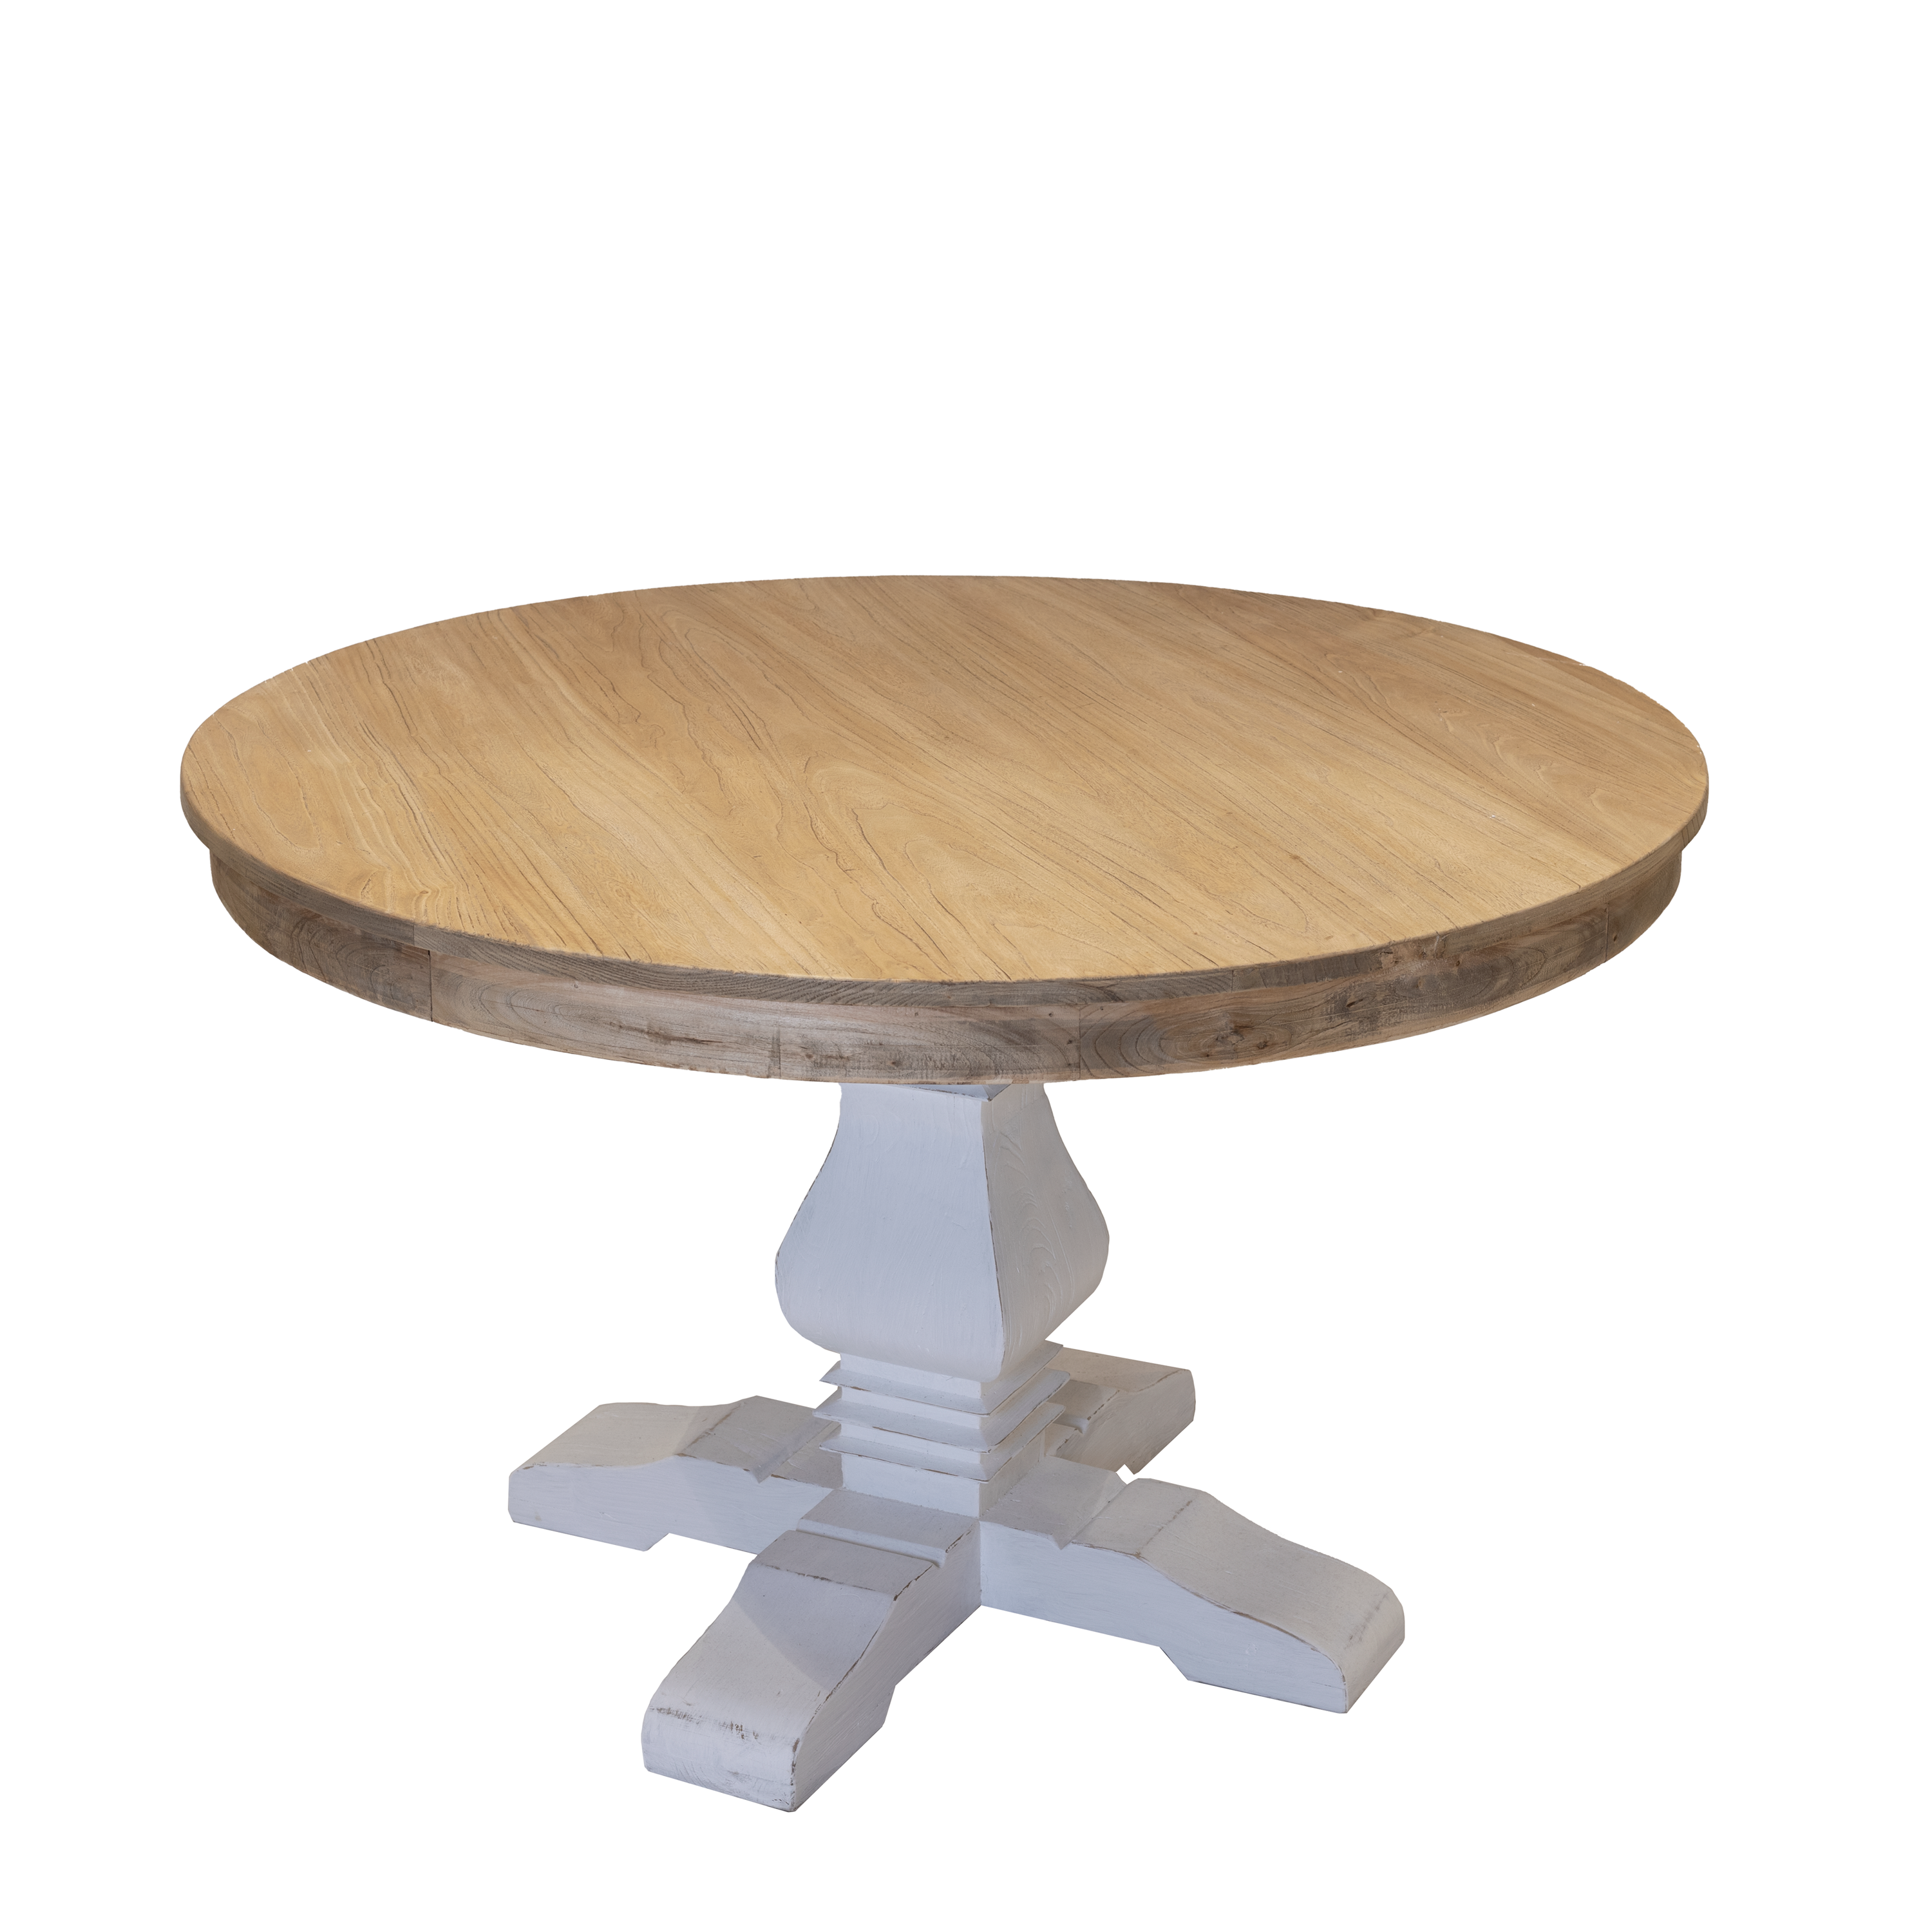 Billie Round Dining Table - 3 Sizes